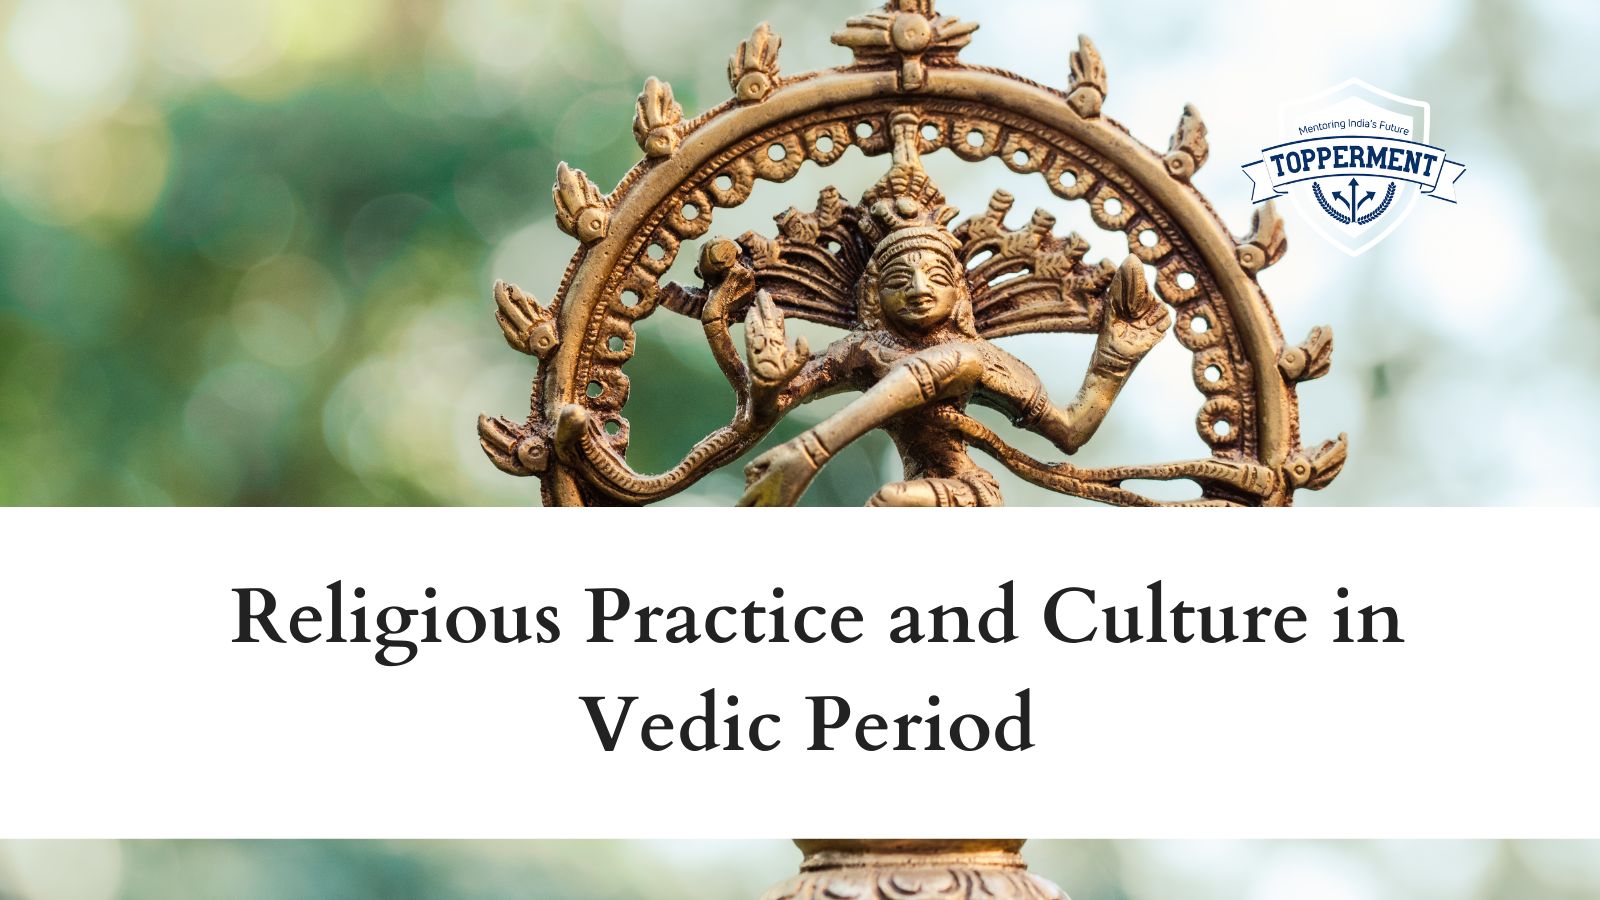 Religious-Practices-and-Culture-in-Vedic-Period-Best-UPSC-IAS-Coaching-For-Mentorship-And-Guidance